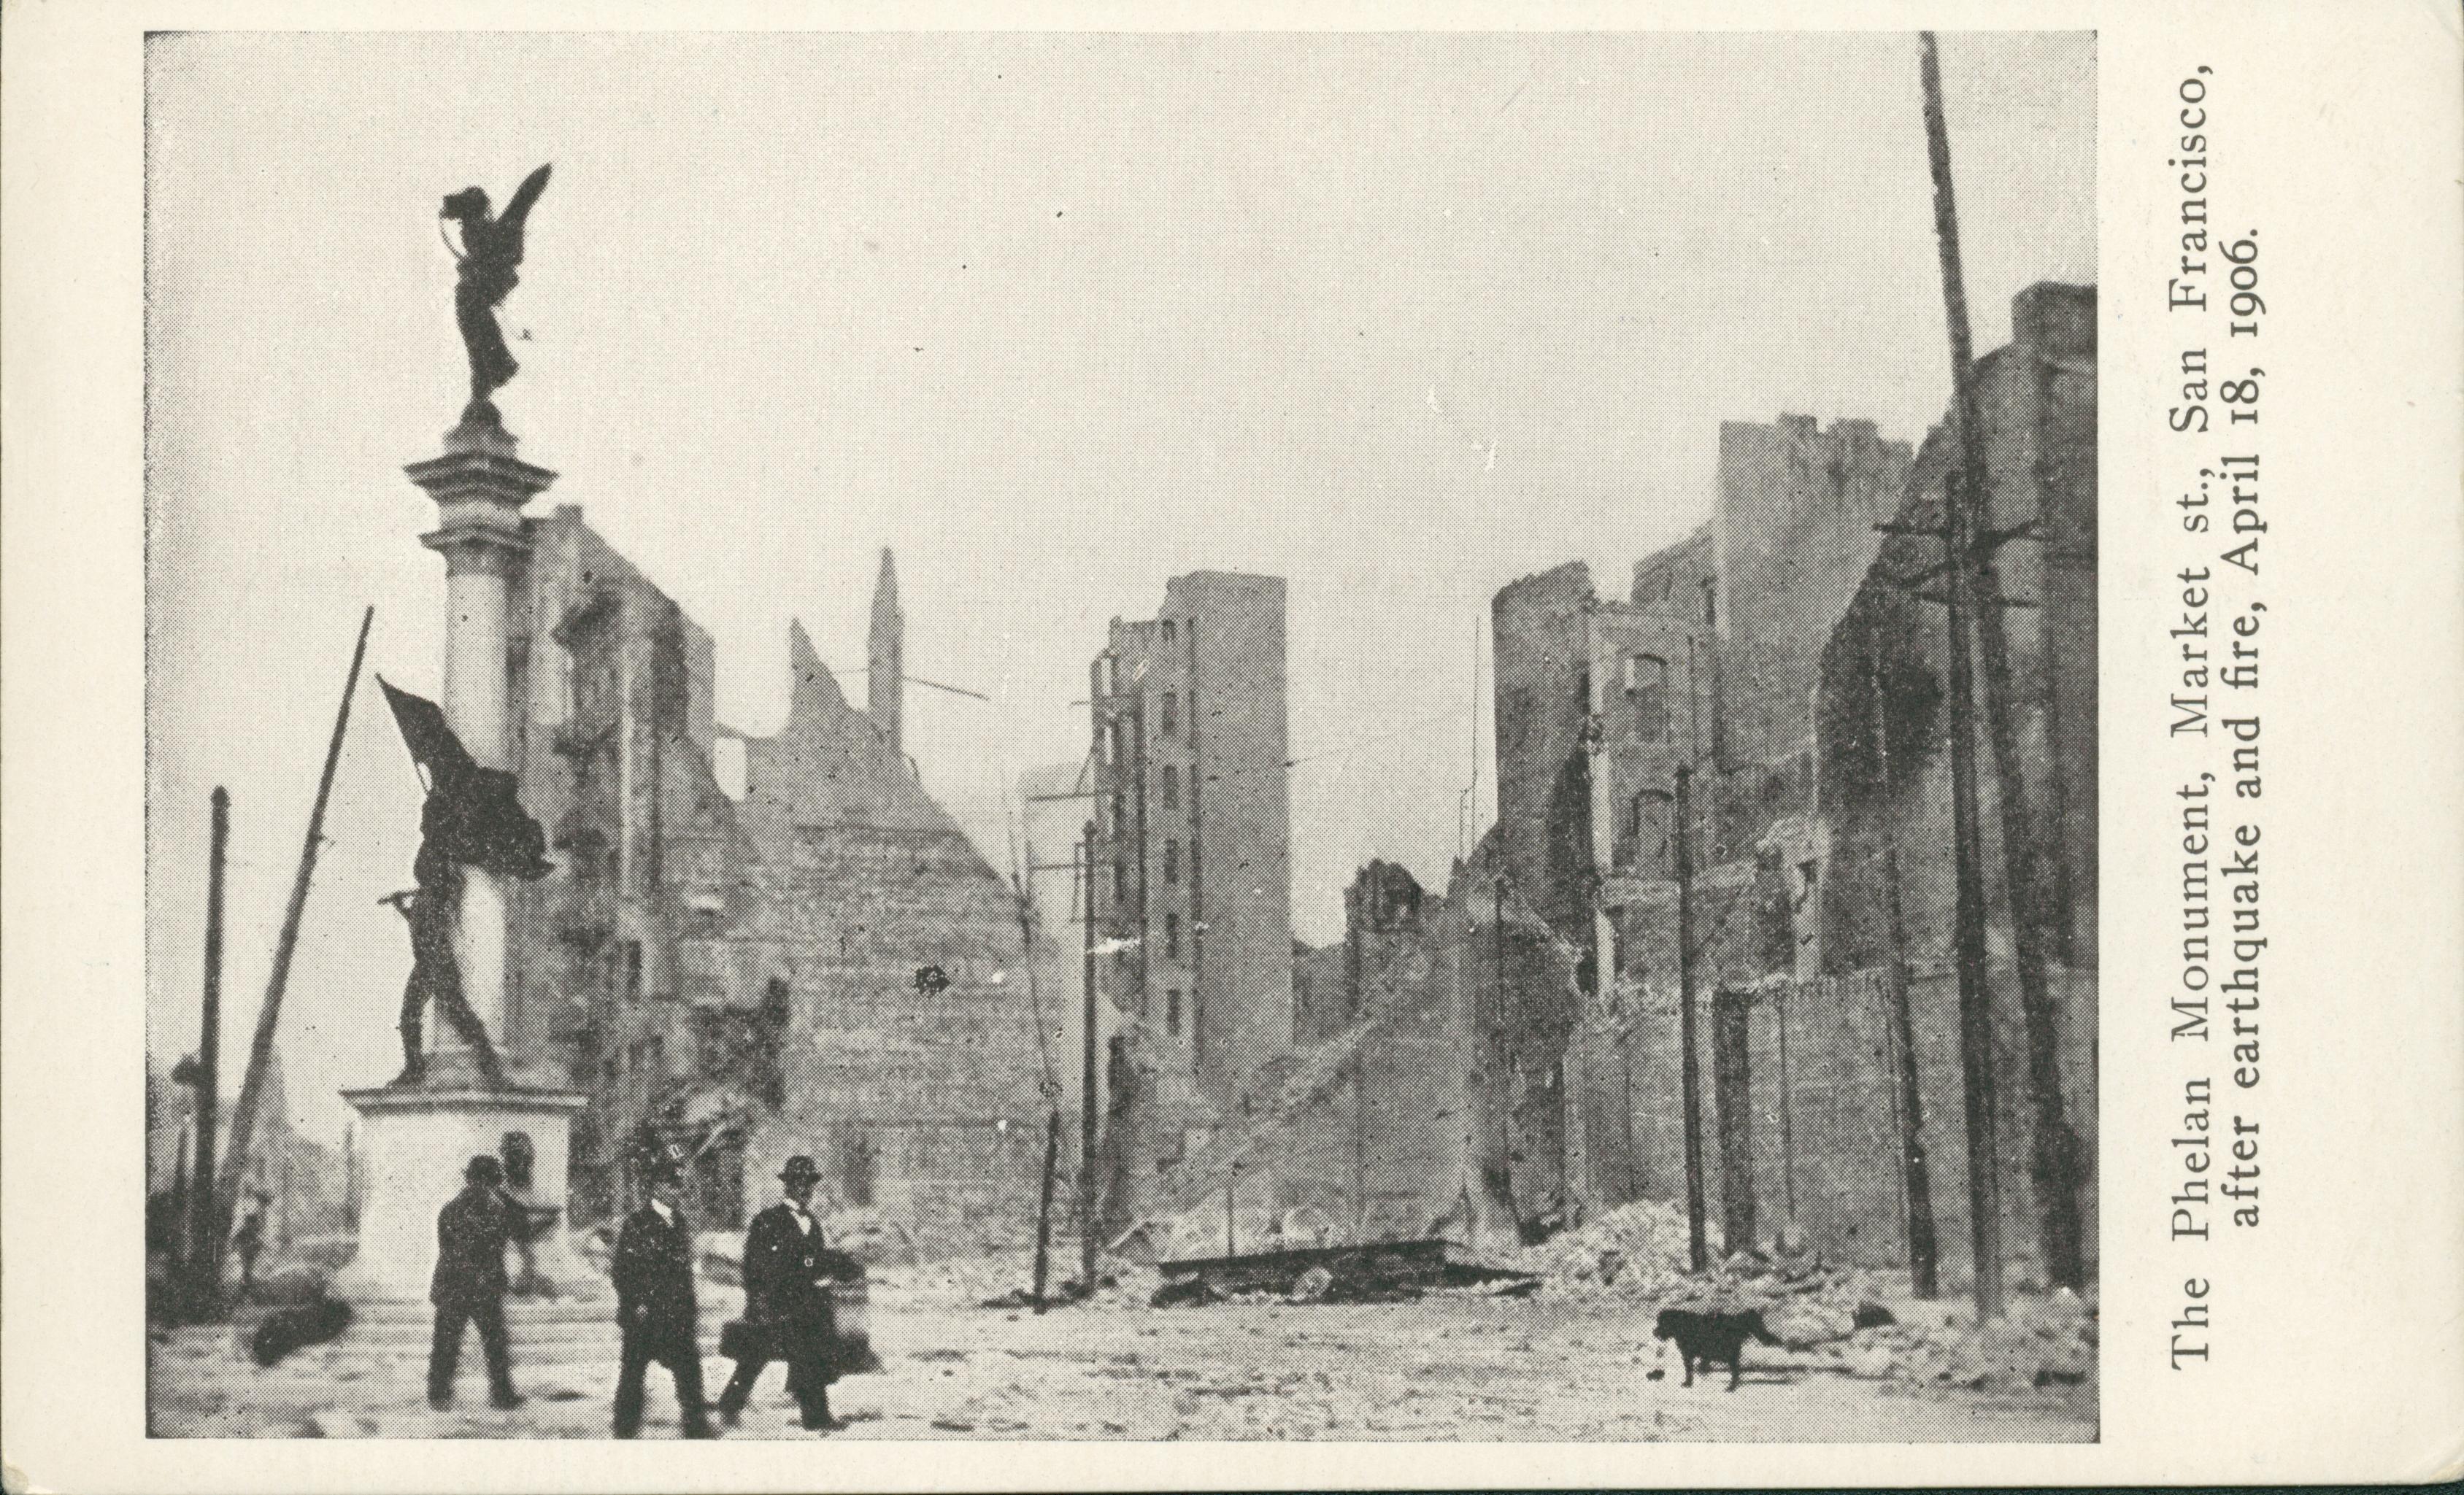 Shows the Phelan Monument standing with multiple collapsed buildings in the background.